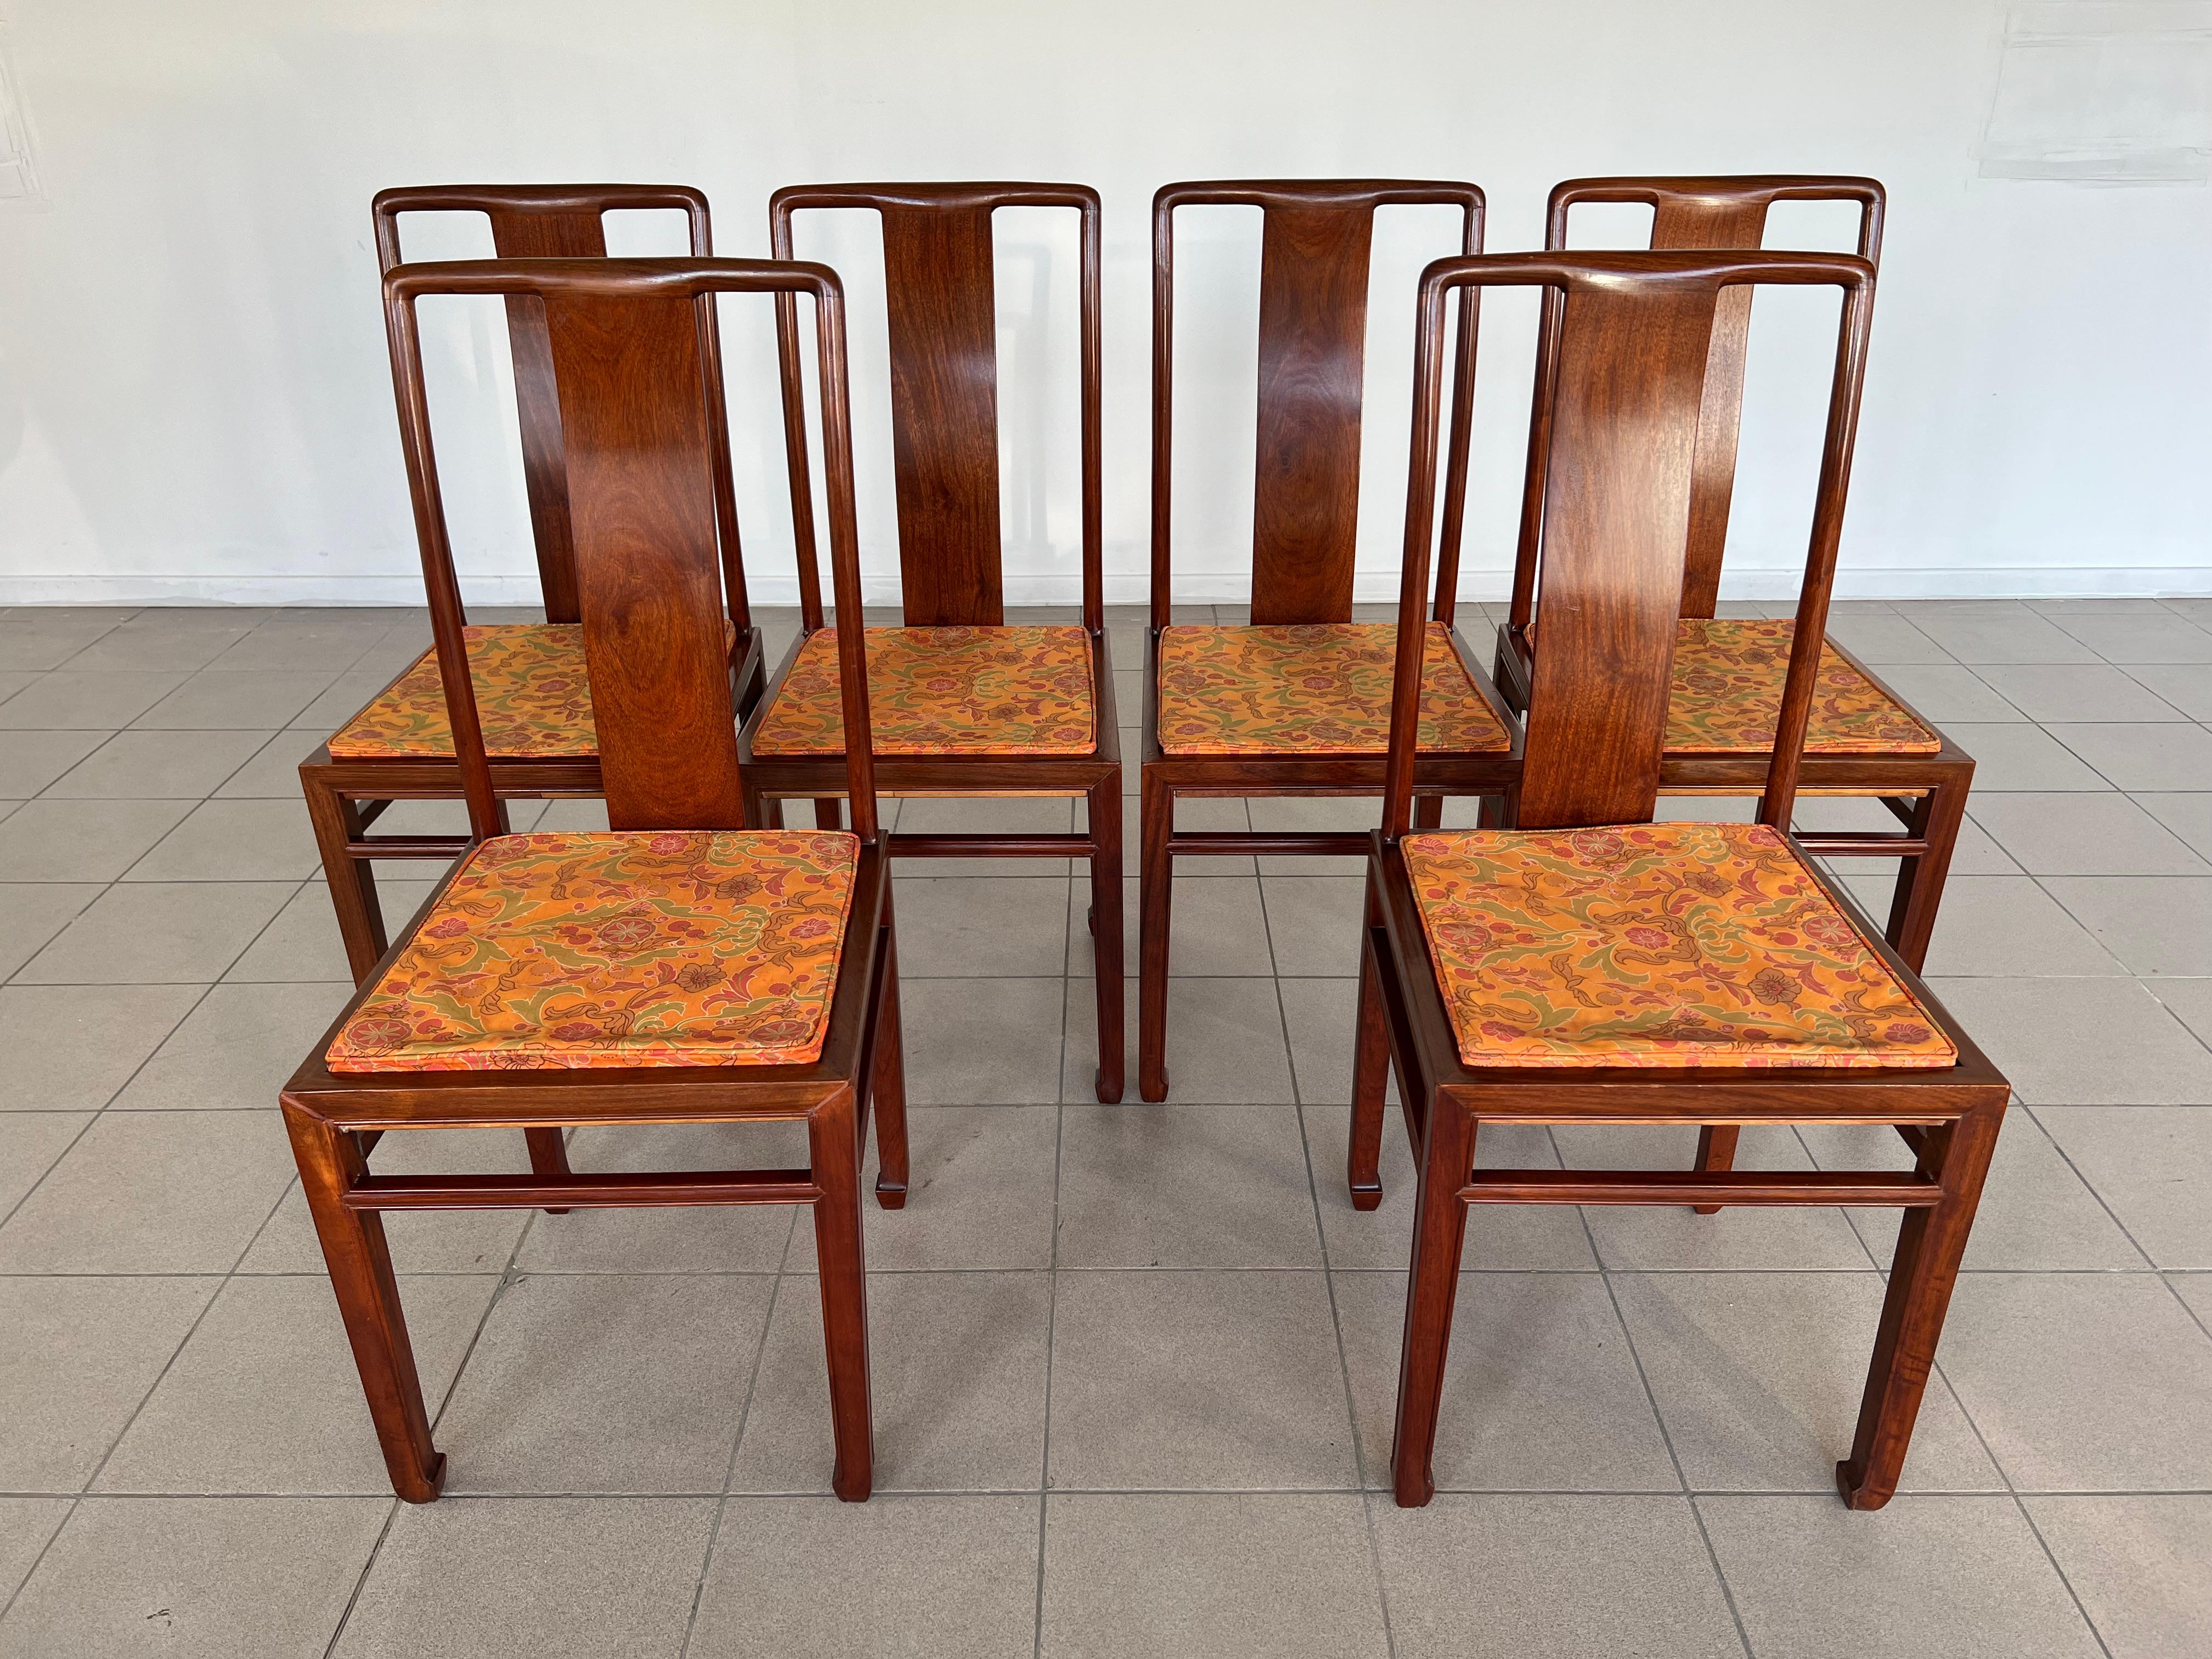 Vintage Chinoiserie Dining Chairs - Set of 6 1